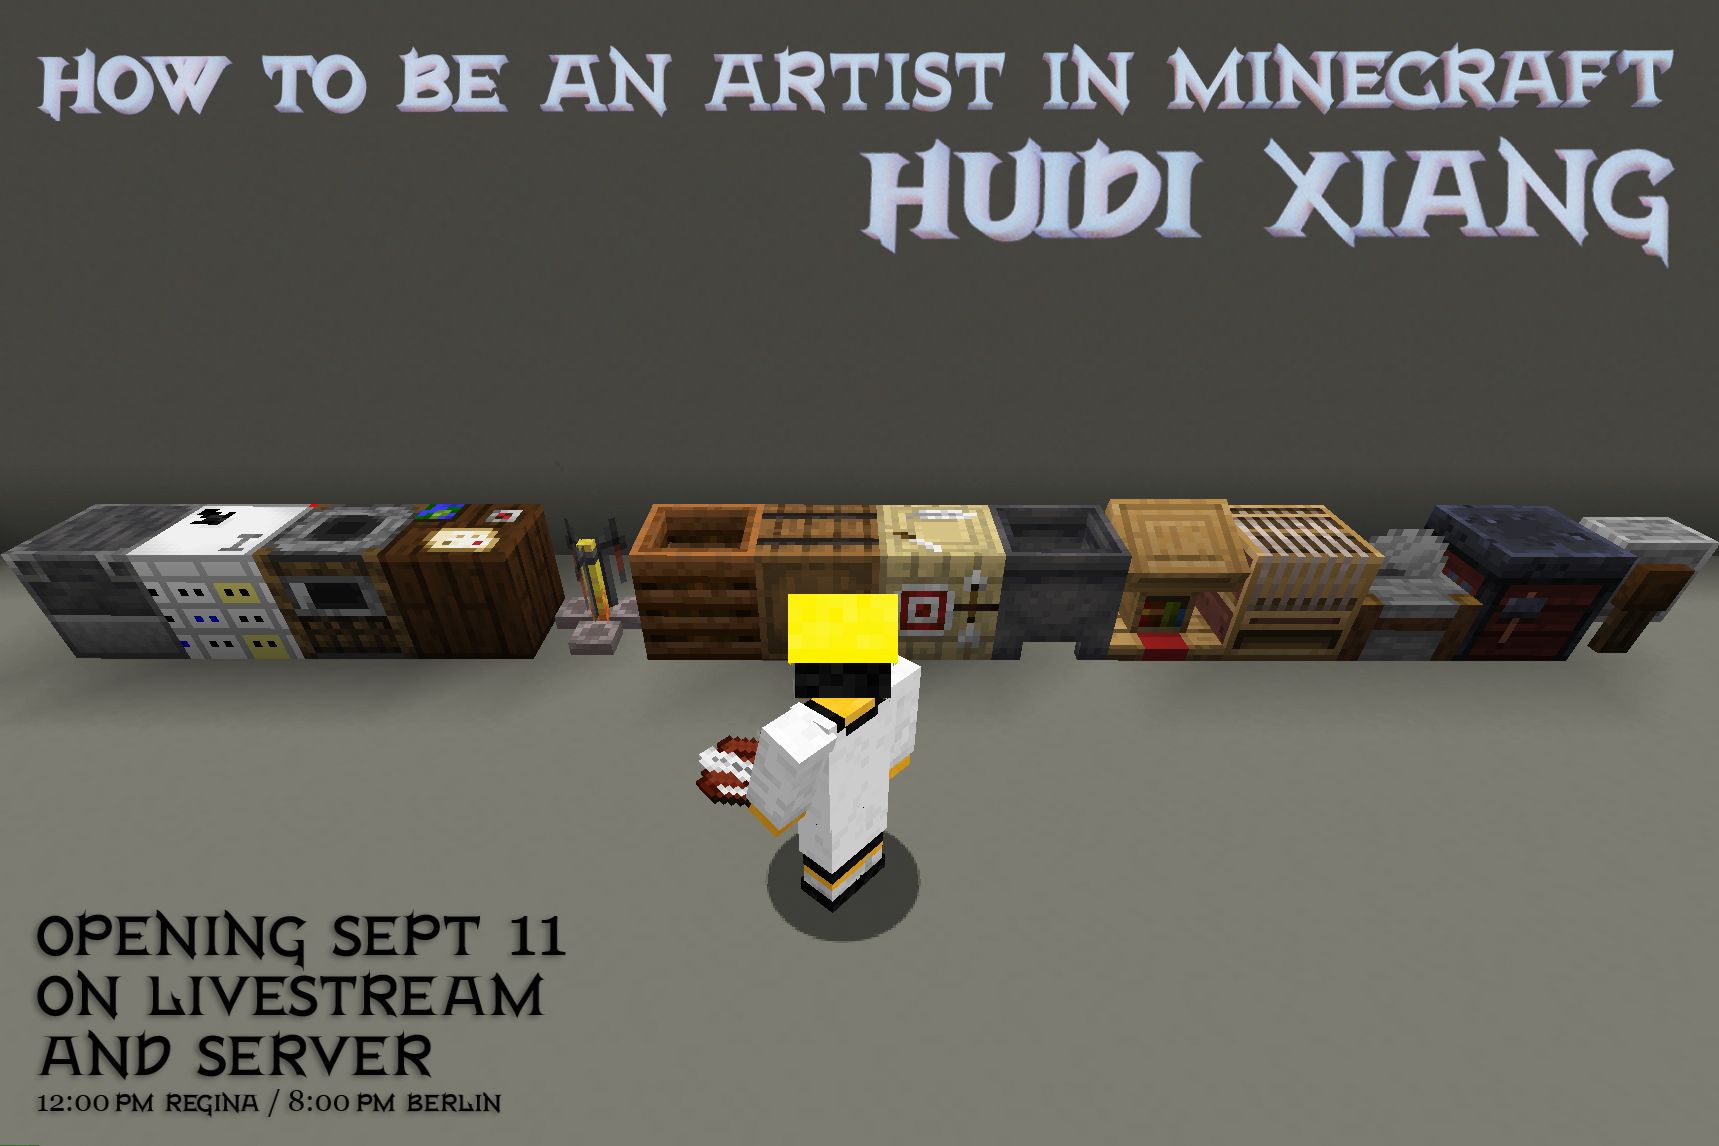 Flyer for the How to be an artist in minecraft opening, showing the lineup of all the work tables, including the artist data table, that has been added to the game